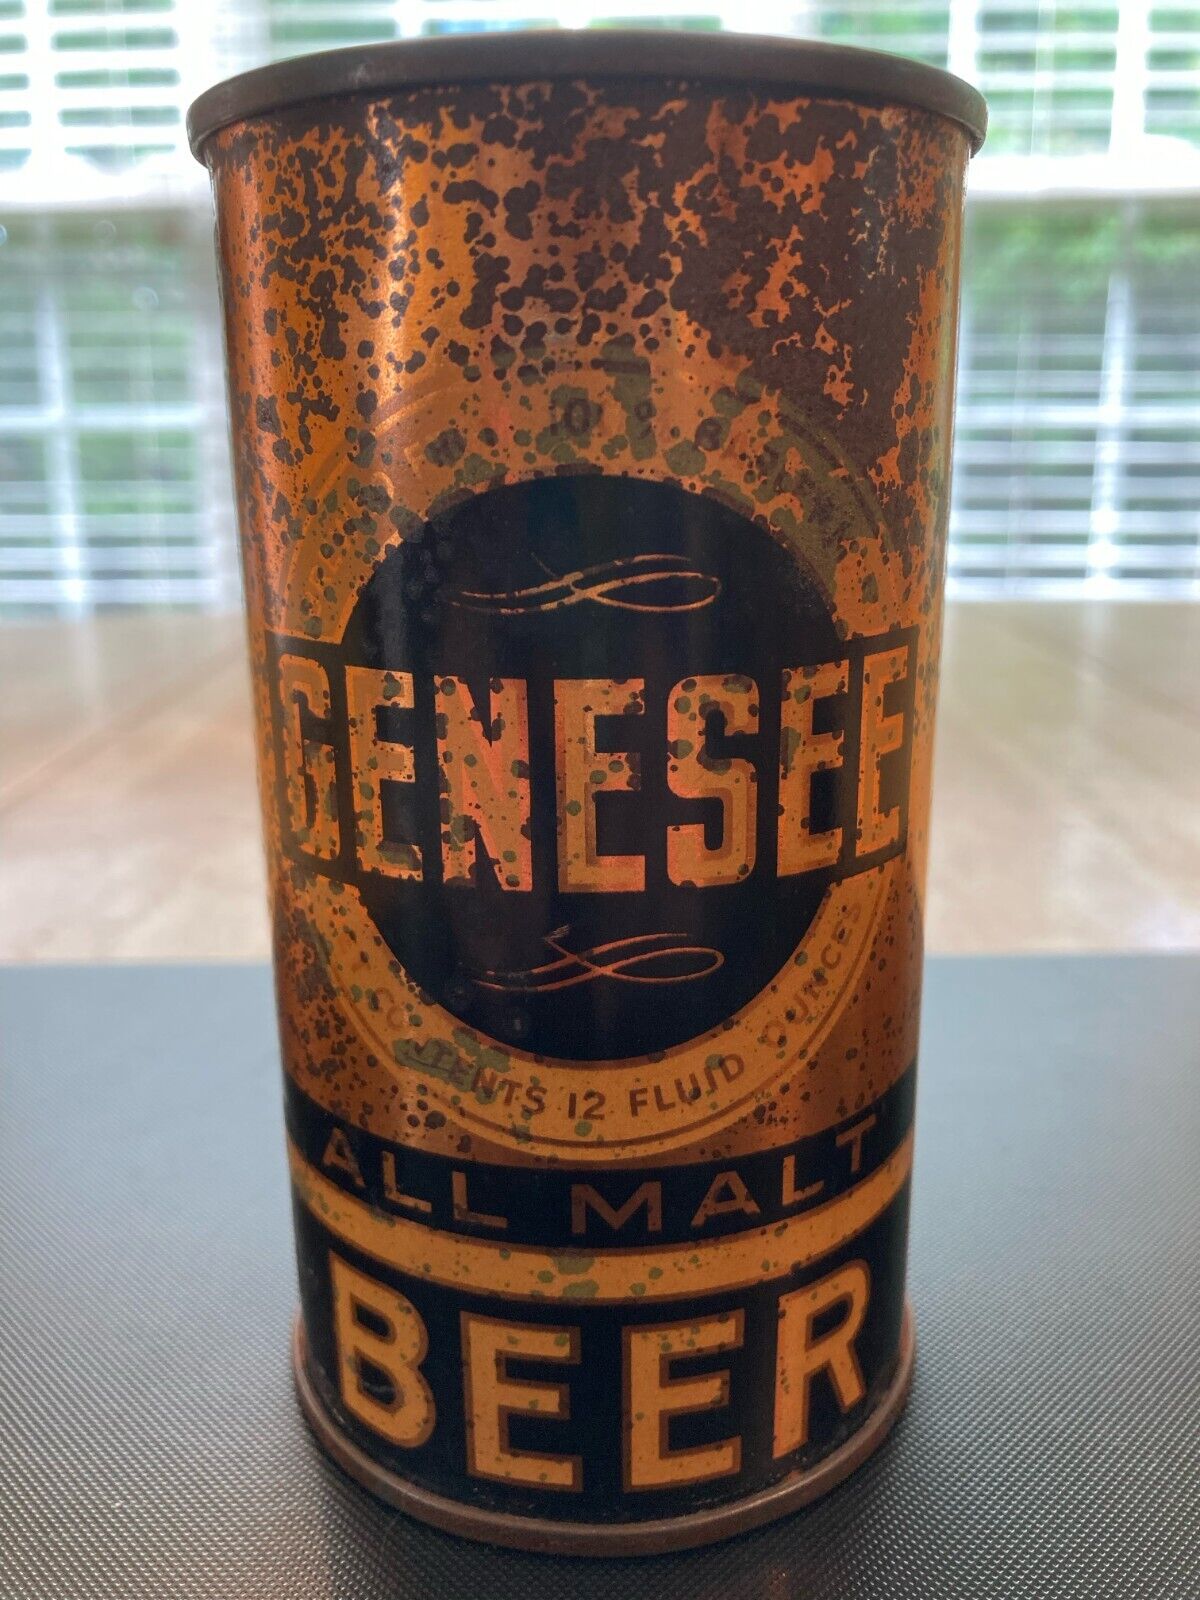 Genesee (All Malt) Beer, OI IRTP FT TO, Good Empty Can, Humidity Spotting